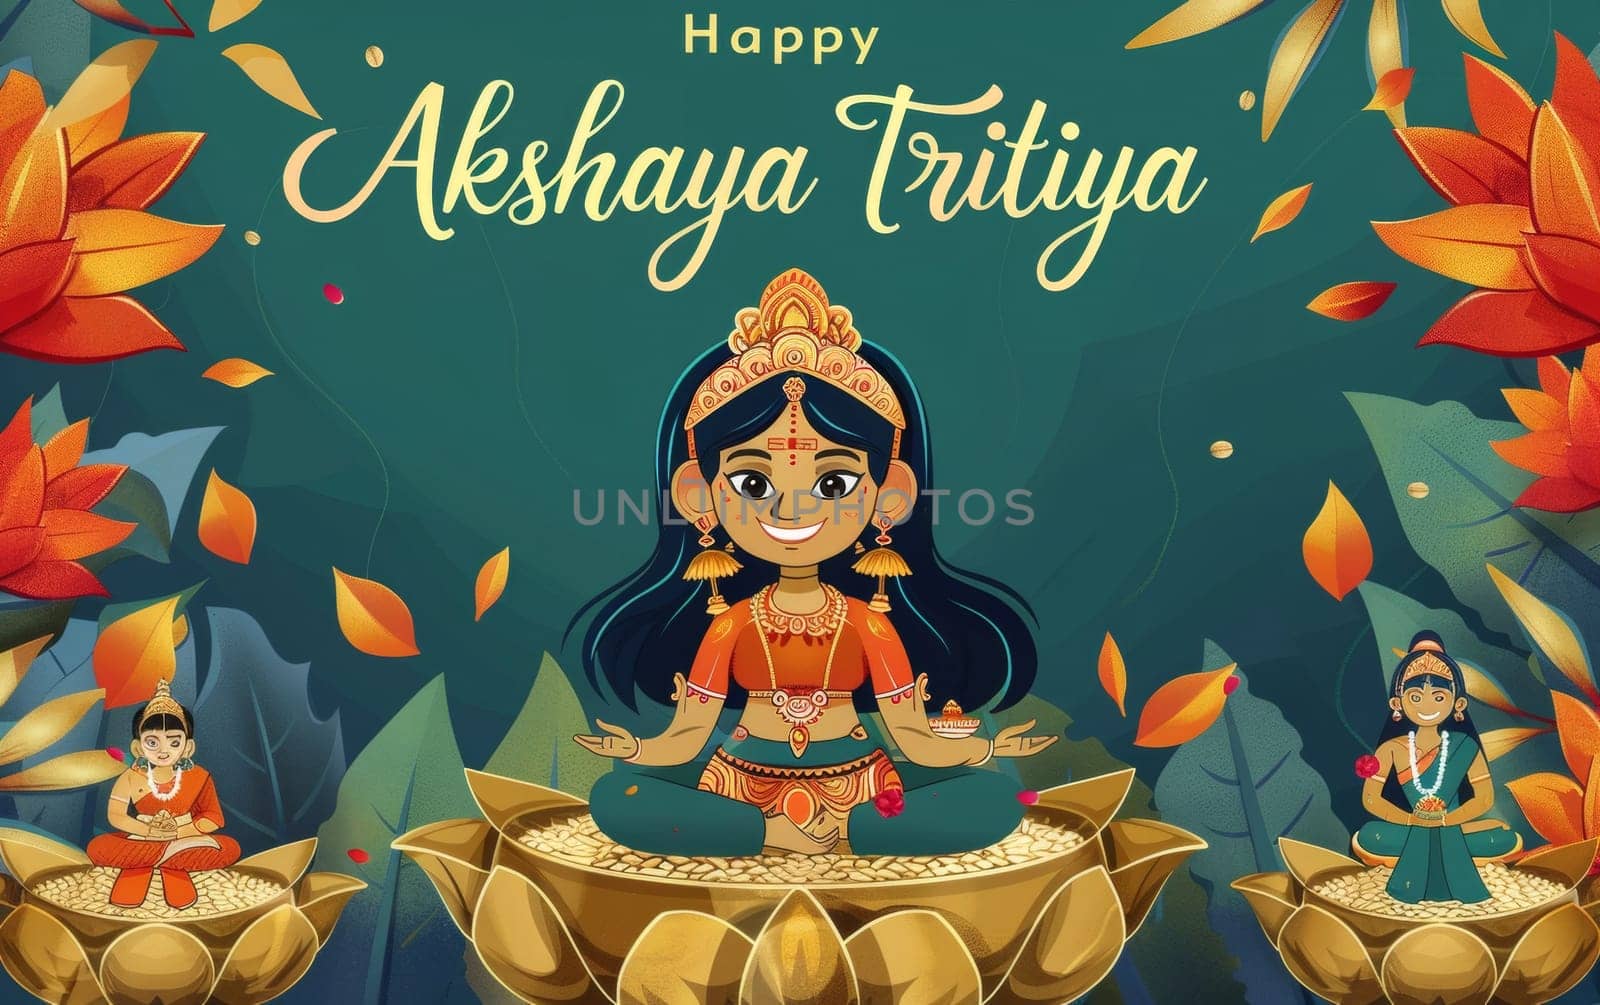 Charming Akshaya Tritiya greeting featuring Goddess Lakshmi seated on a golden throne surrounded by coins and festive motifs